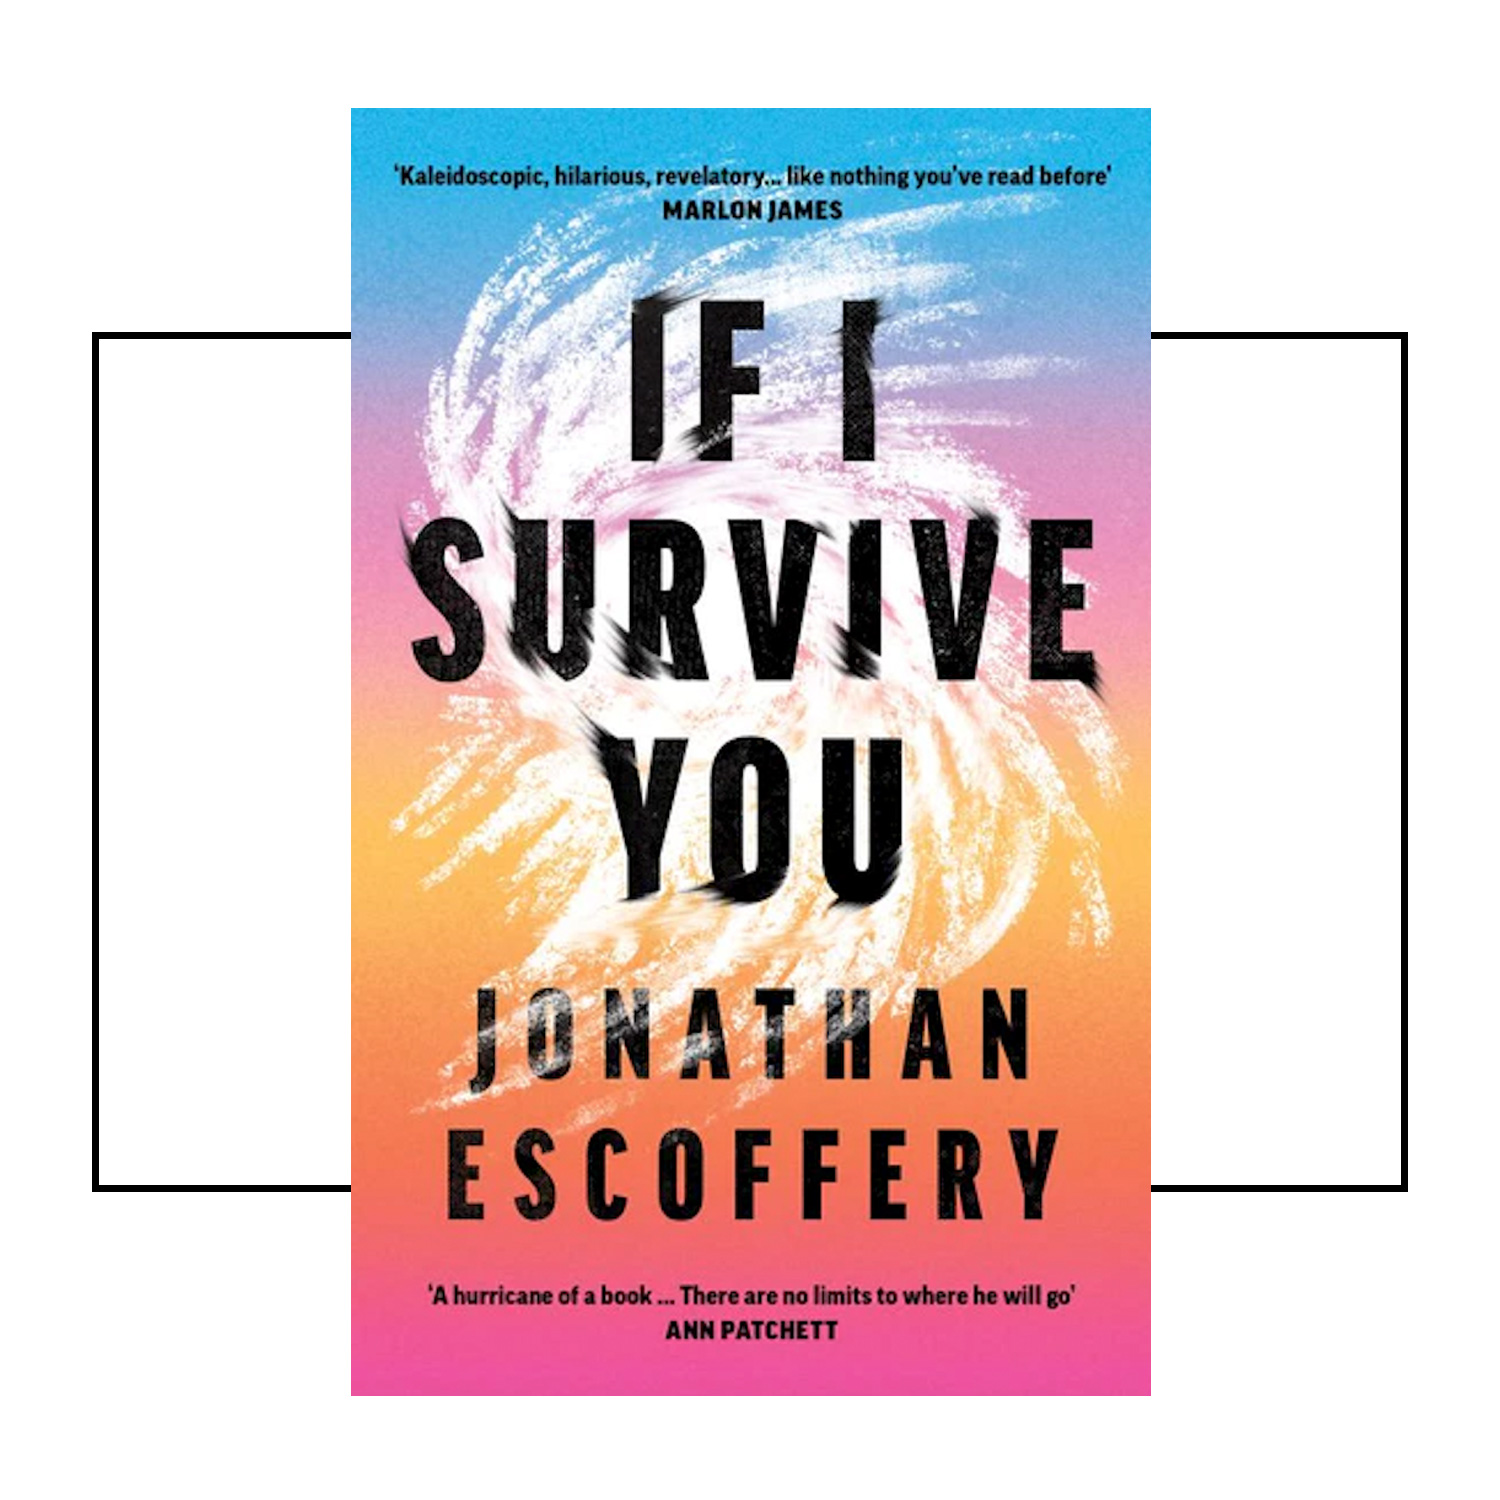 The front cover of Jonathan Escoffery